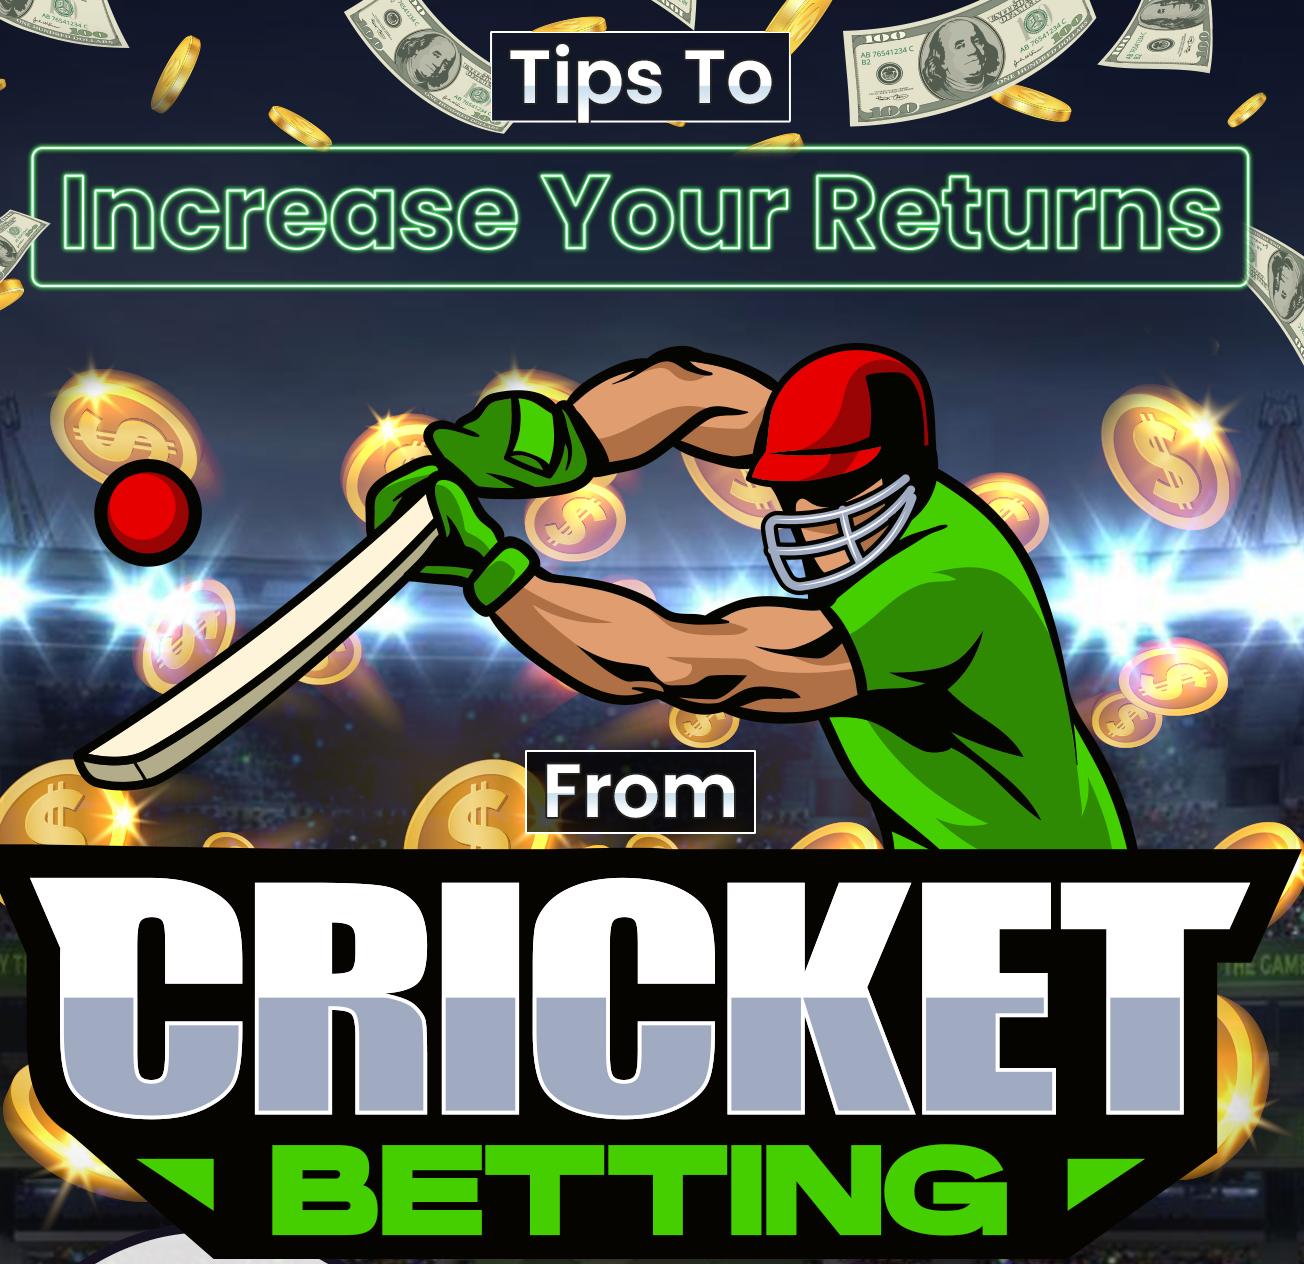 Tips To Improve Your Cricket Betting Ideas